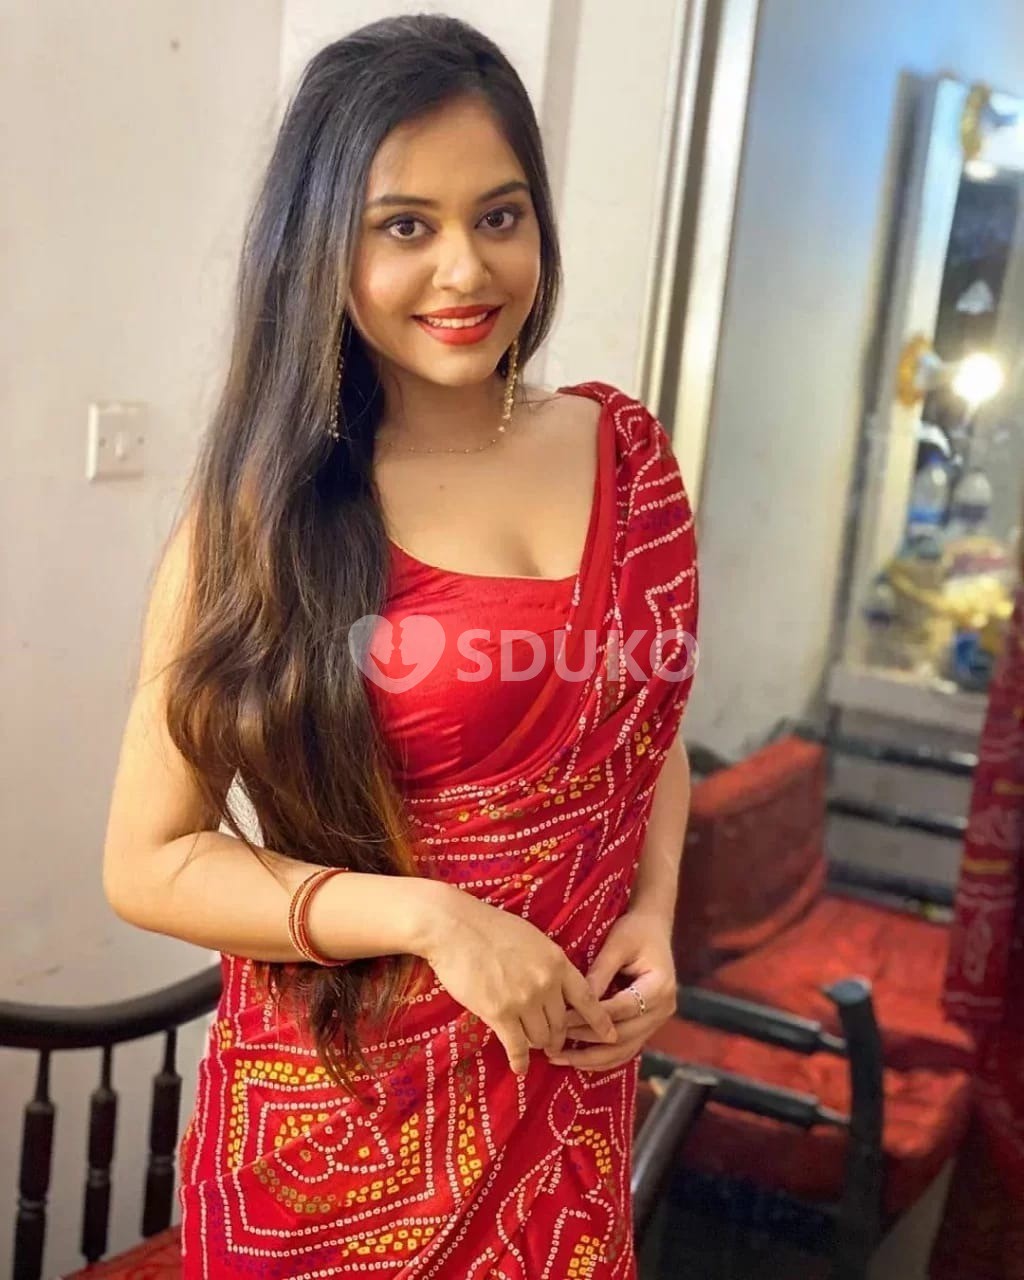 KAROL BAGH 🥰 HOME AND HOTEL SERVICE AVAILABLE FULL SAFE AND SECURE SERVICE AVAILABLE HETAL 23